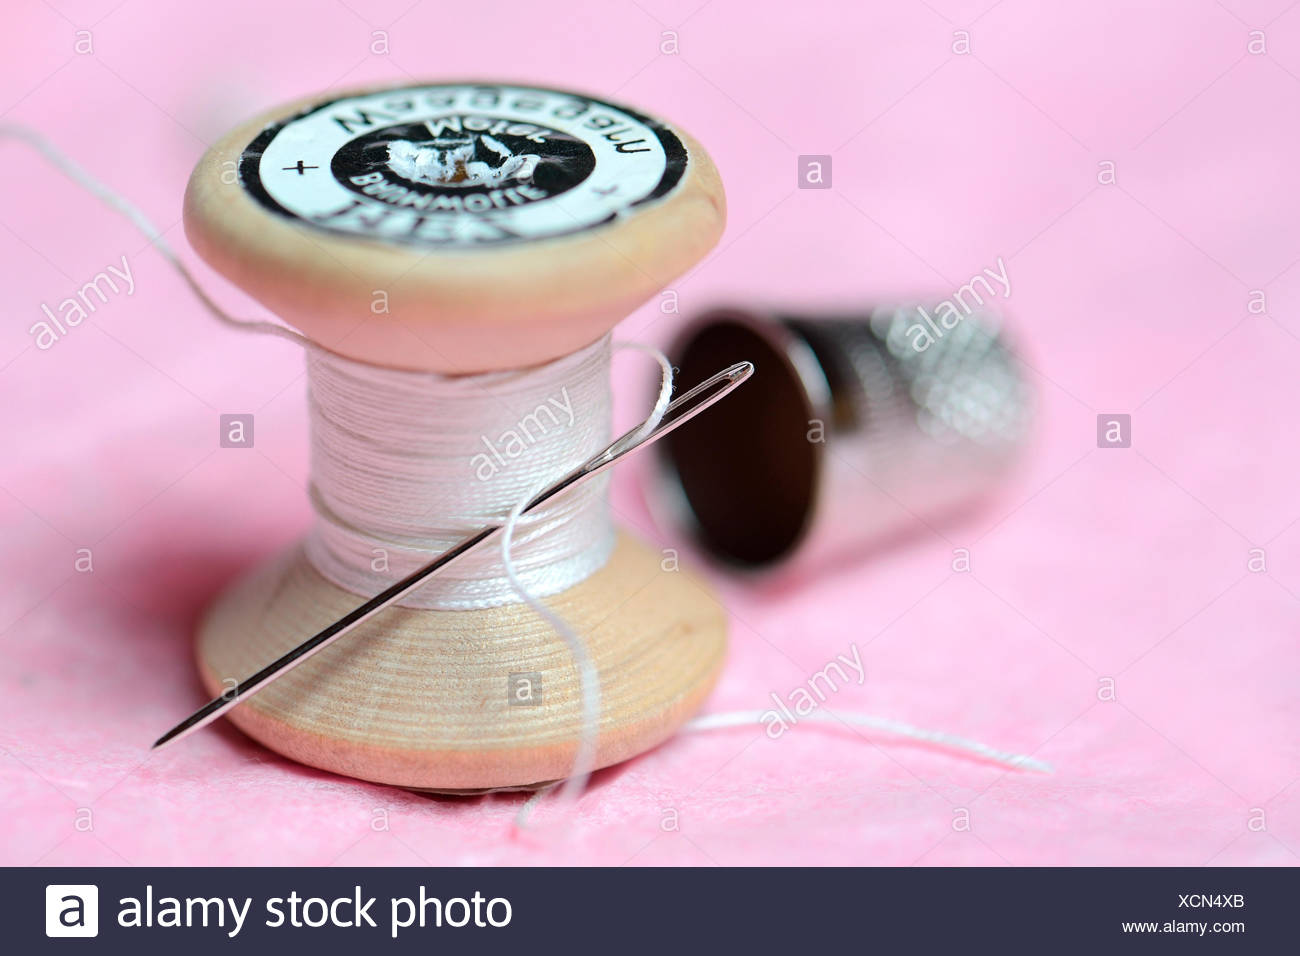 Needle Cotton High Resolution Stock Photography and Images - Alamy